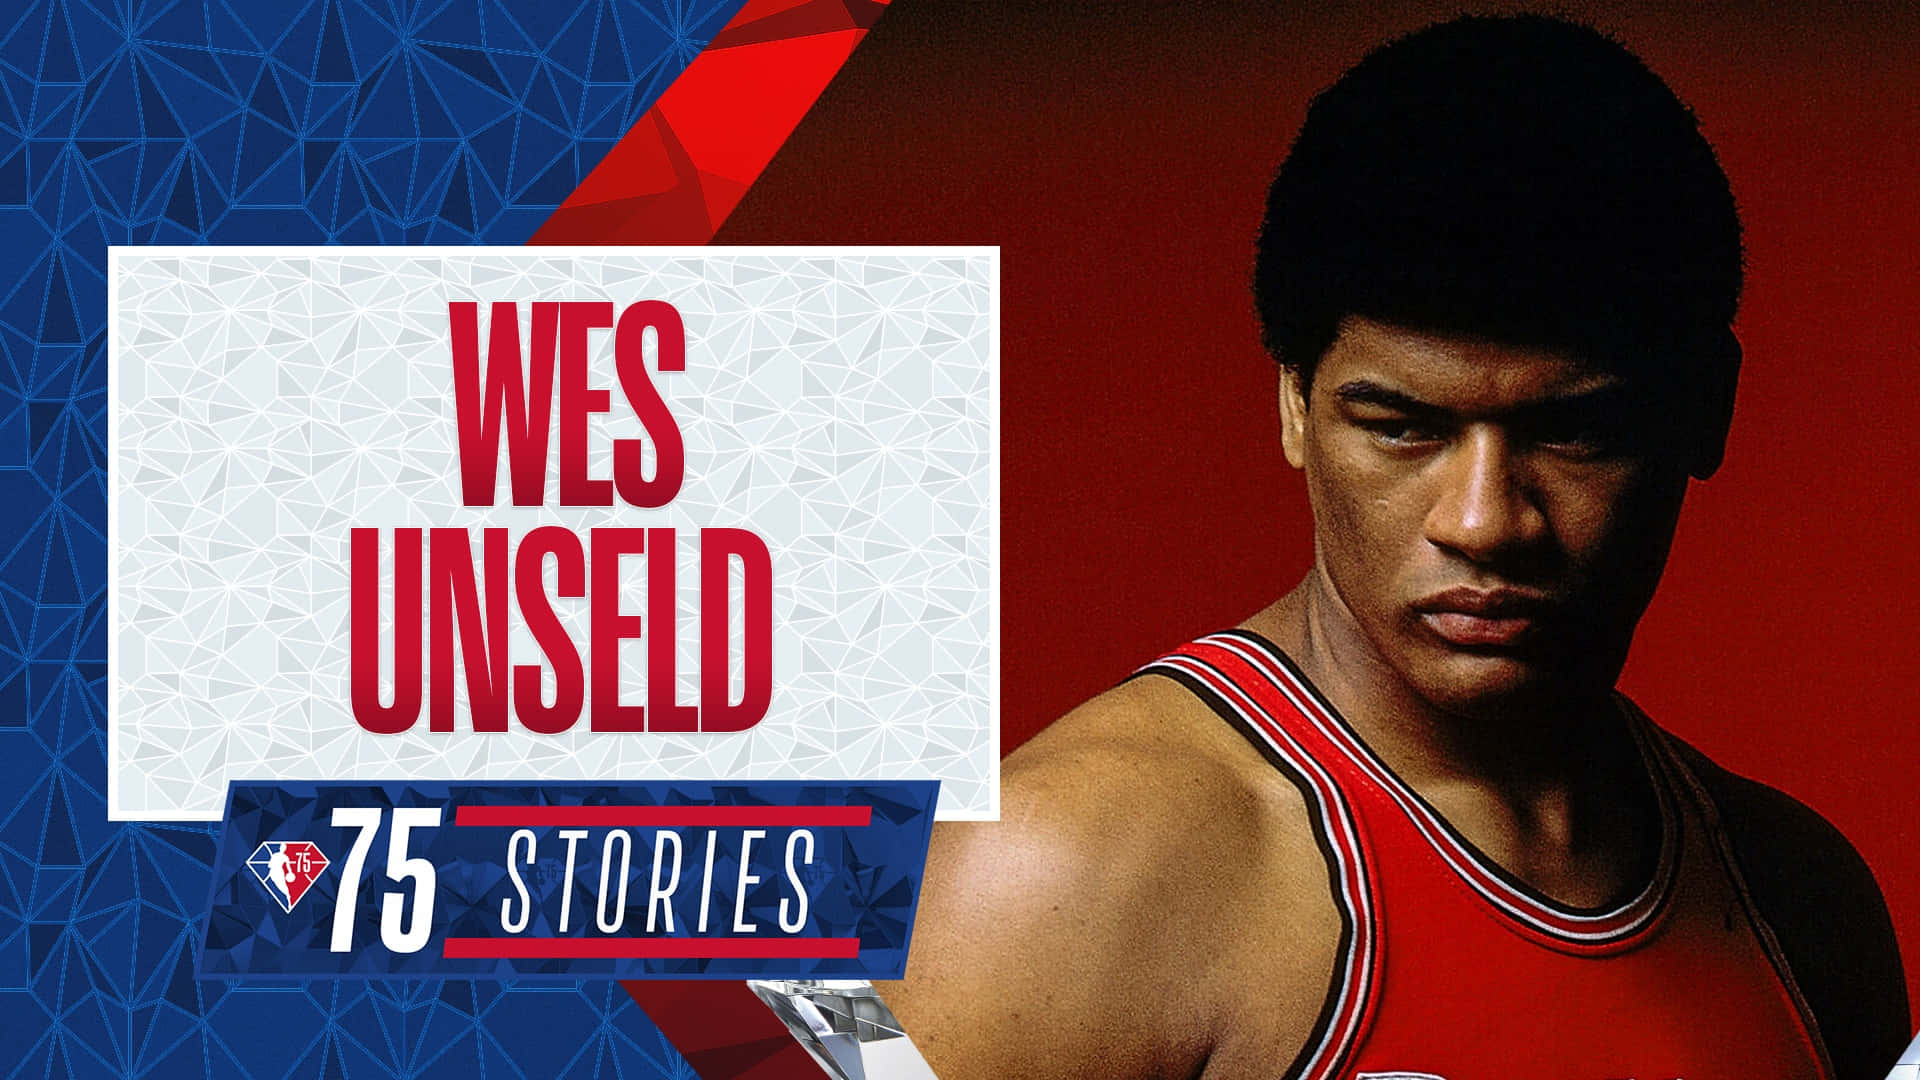 Wes Unseld 1920 X 1080 Wallpaper